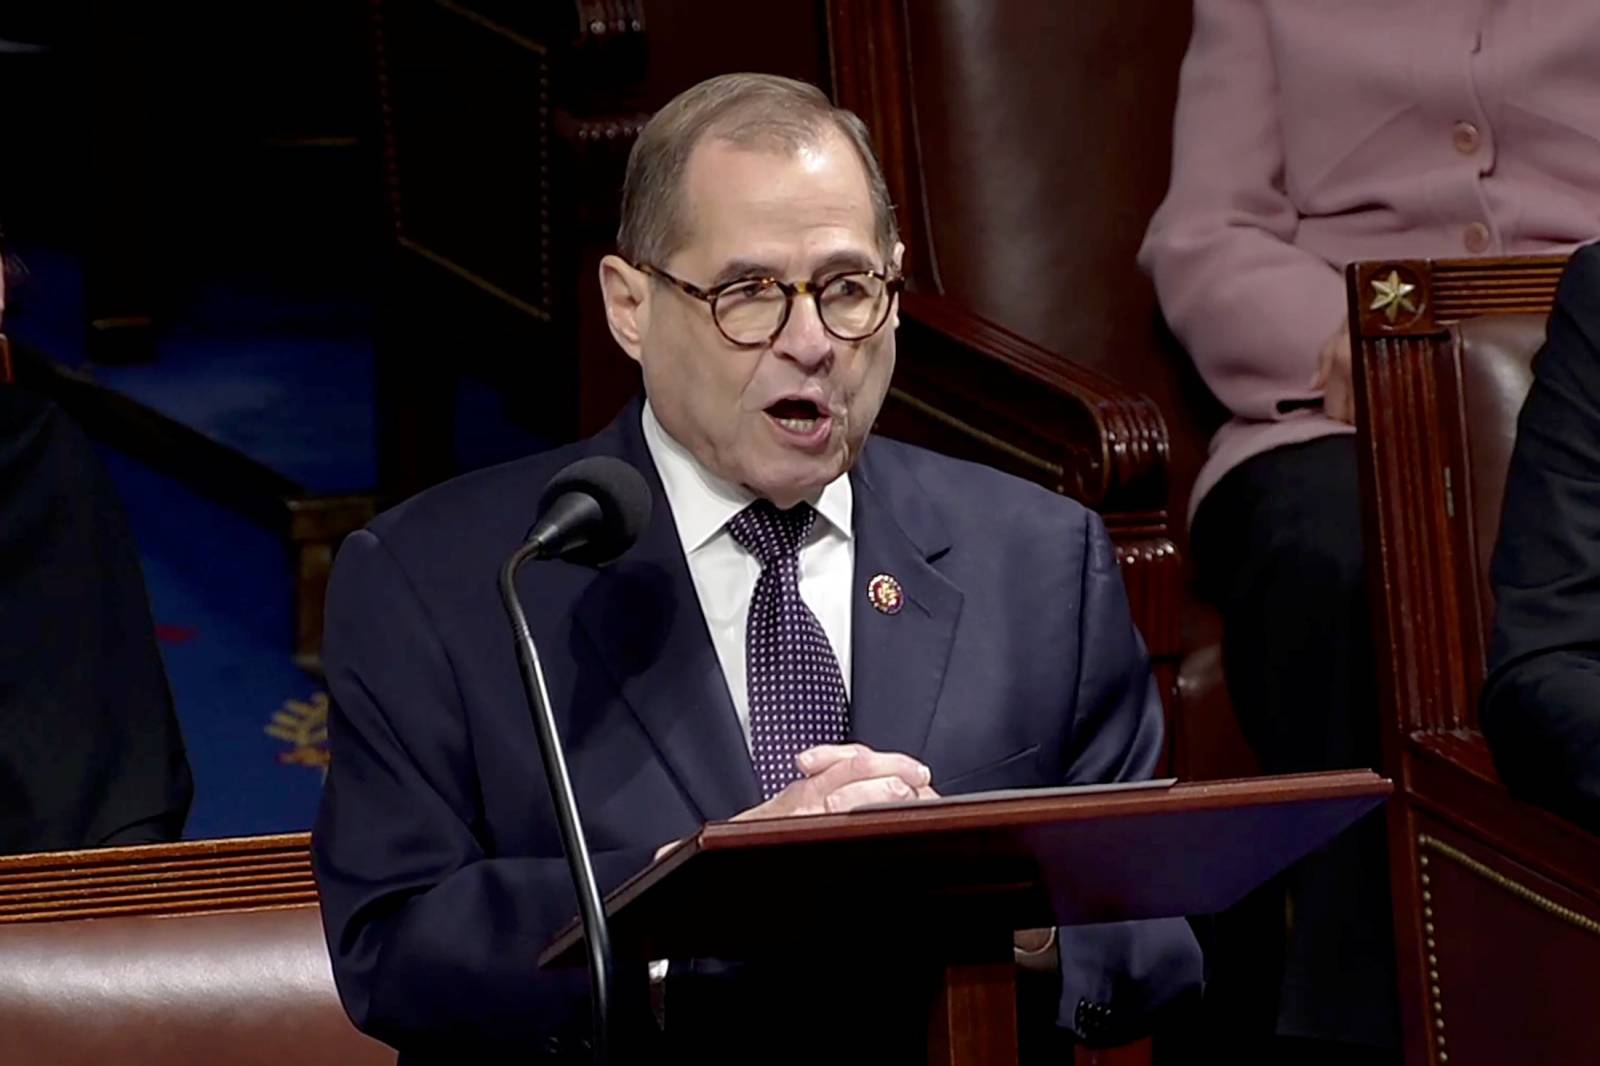 House Judiciary Committee Chairman Rep. Nadler speaks ahead of a vote on impeachment against President Trump on Capitol Hill